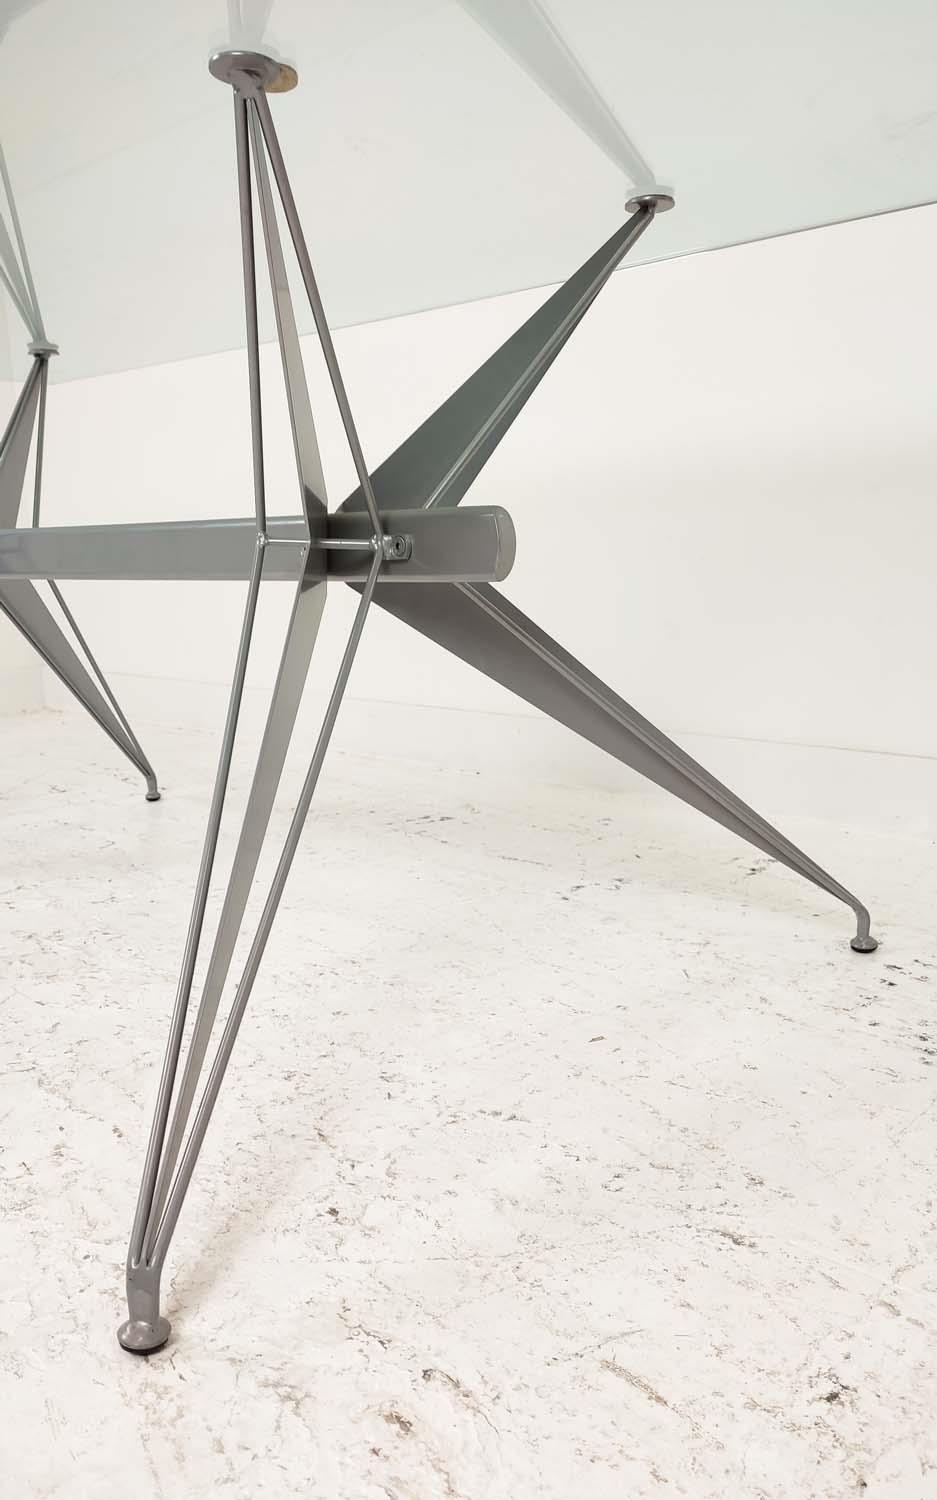 ATRIBUTED TO FASEM DINING TABLE, by Studio Archirivolto, glass top on metal base, 180cm x 85cm x - Image 4 of 8